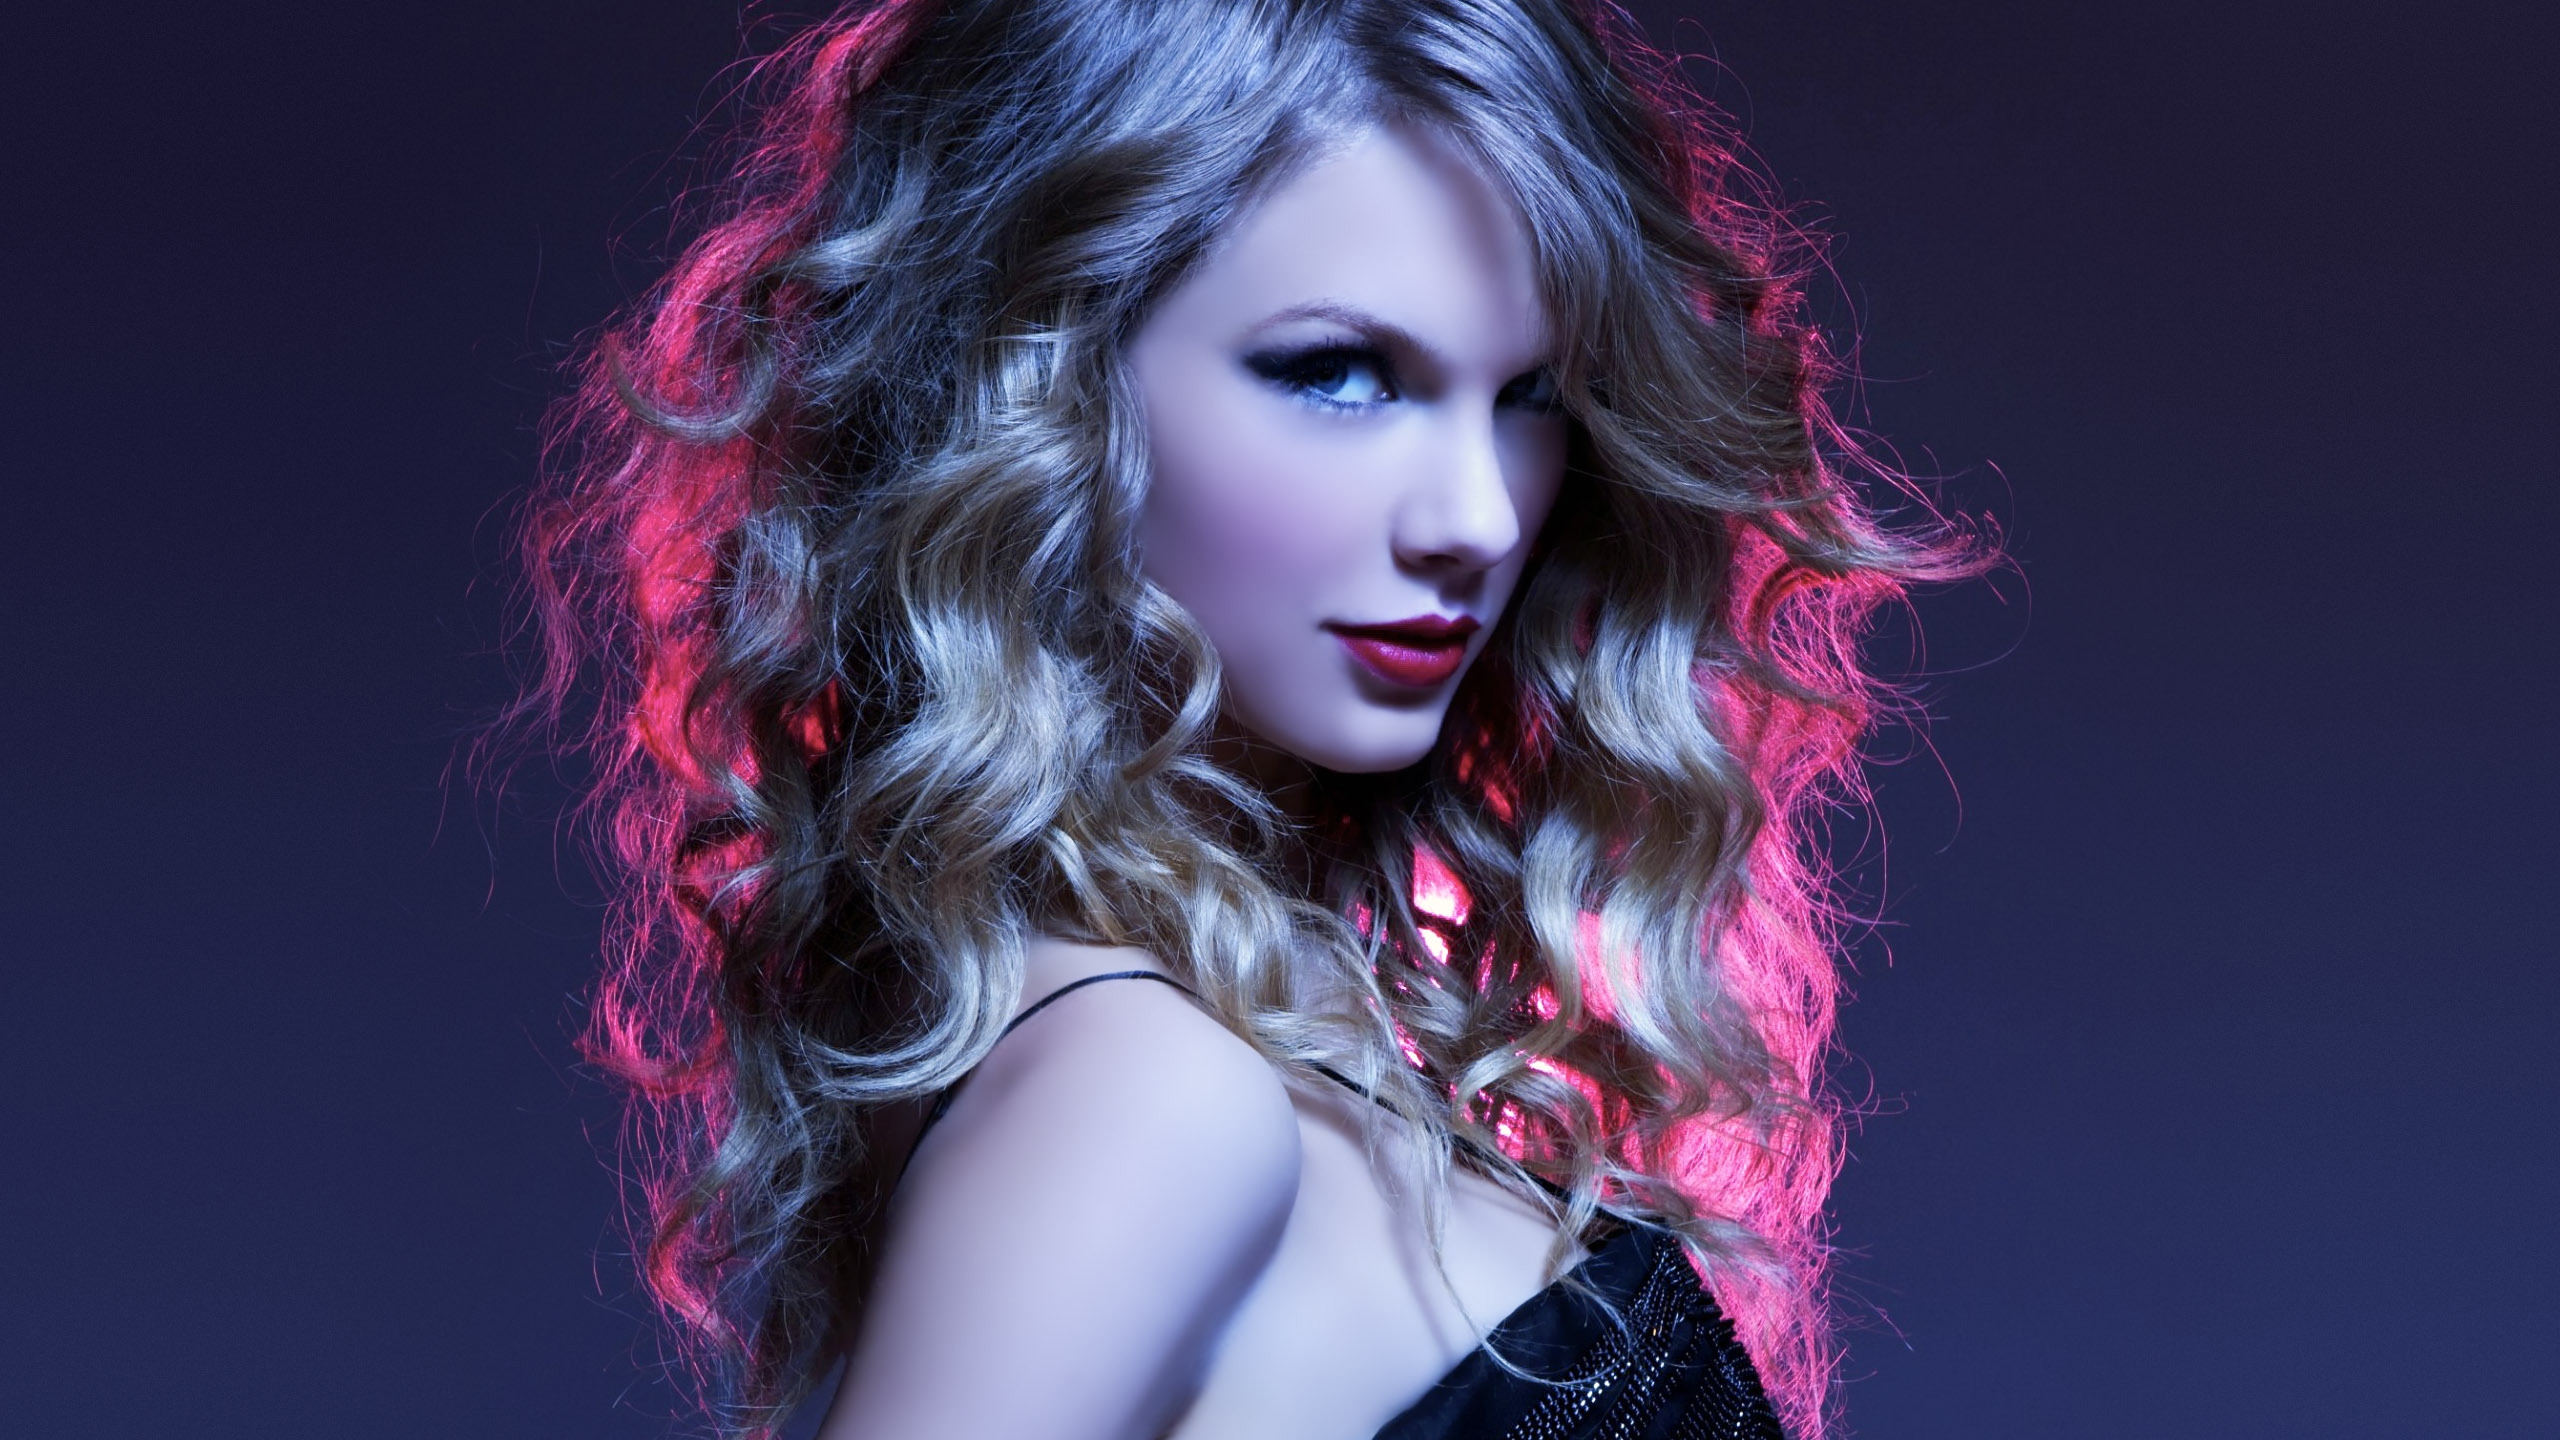 The Amazing Taylor Swift for 2560x1440 HDTV resolution